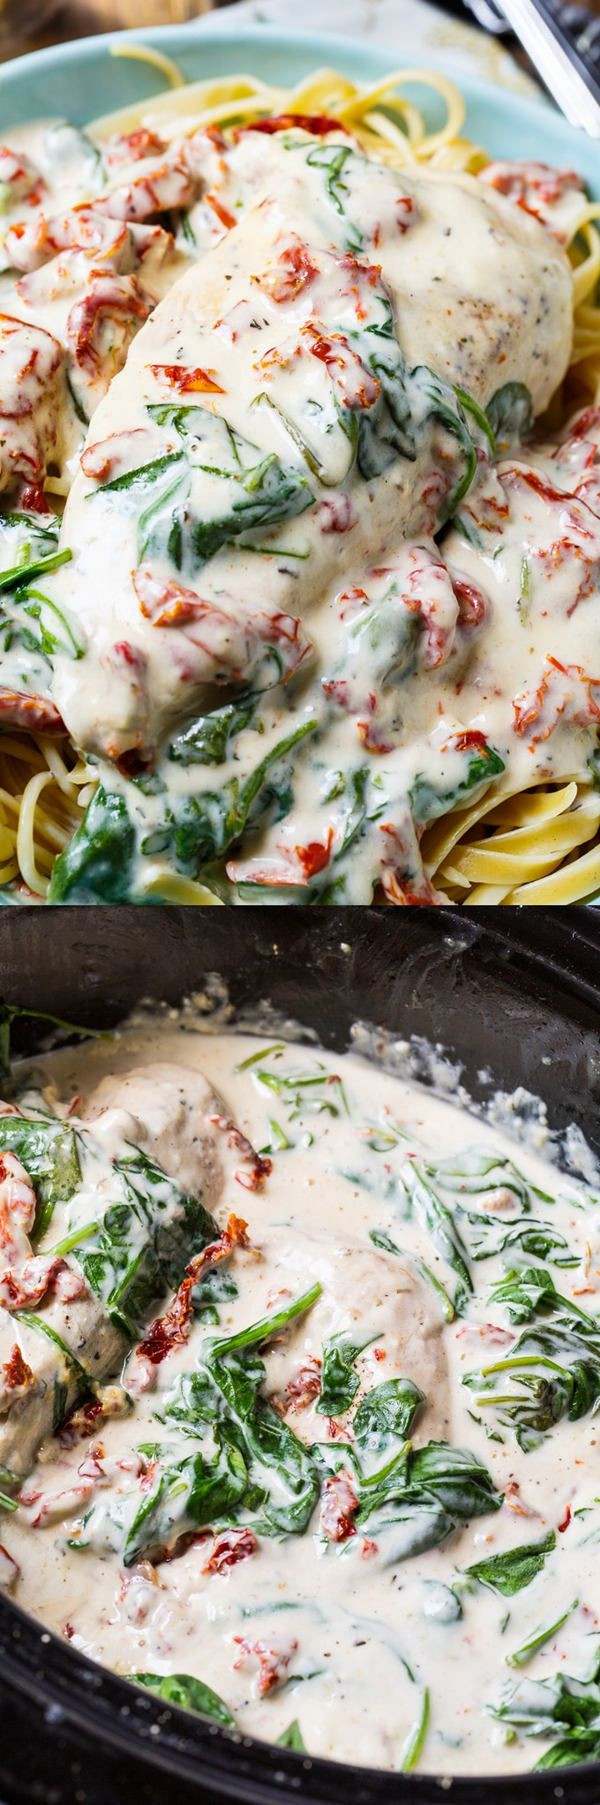 Slow Cooker Main Dishes
 Slow Cooker Creamy Tuscan Chicken